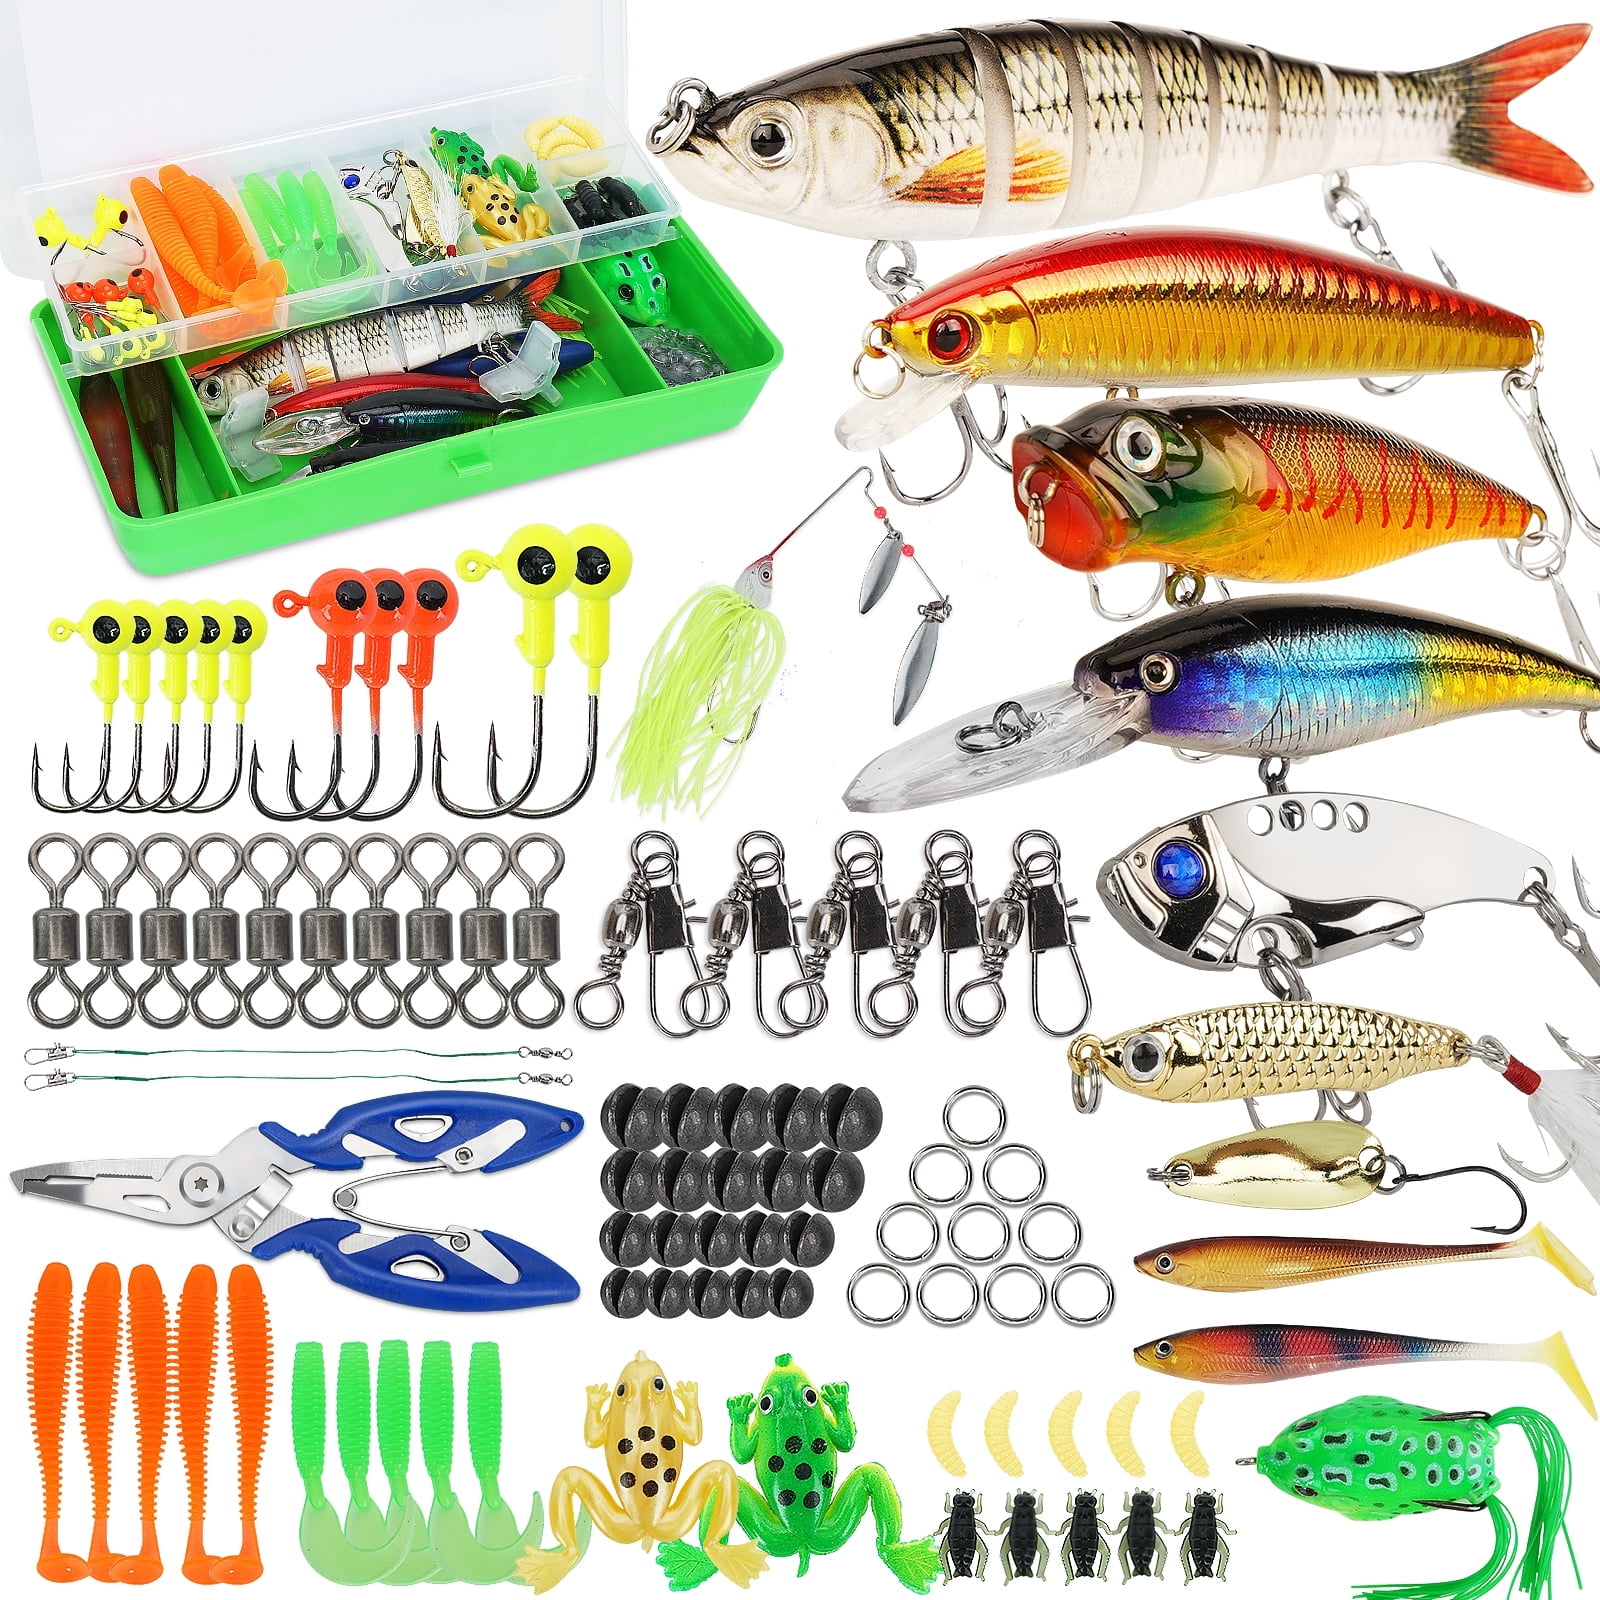 Fishing Lures Tackle Box Trout & Crappie Ice Fishing Gear Kit,Including Jig  Heads,Soft Plastic baits for Panfish,Bluegill, Bass etc Freshwater Fishing  Equipment 